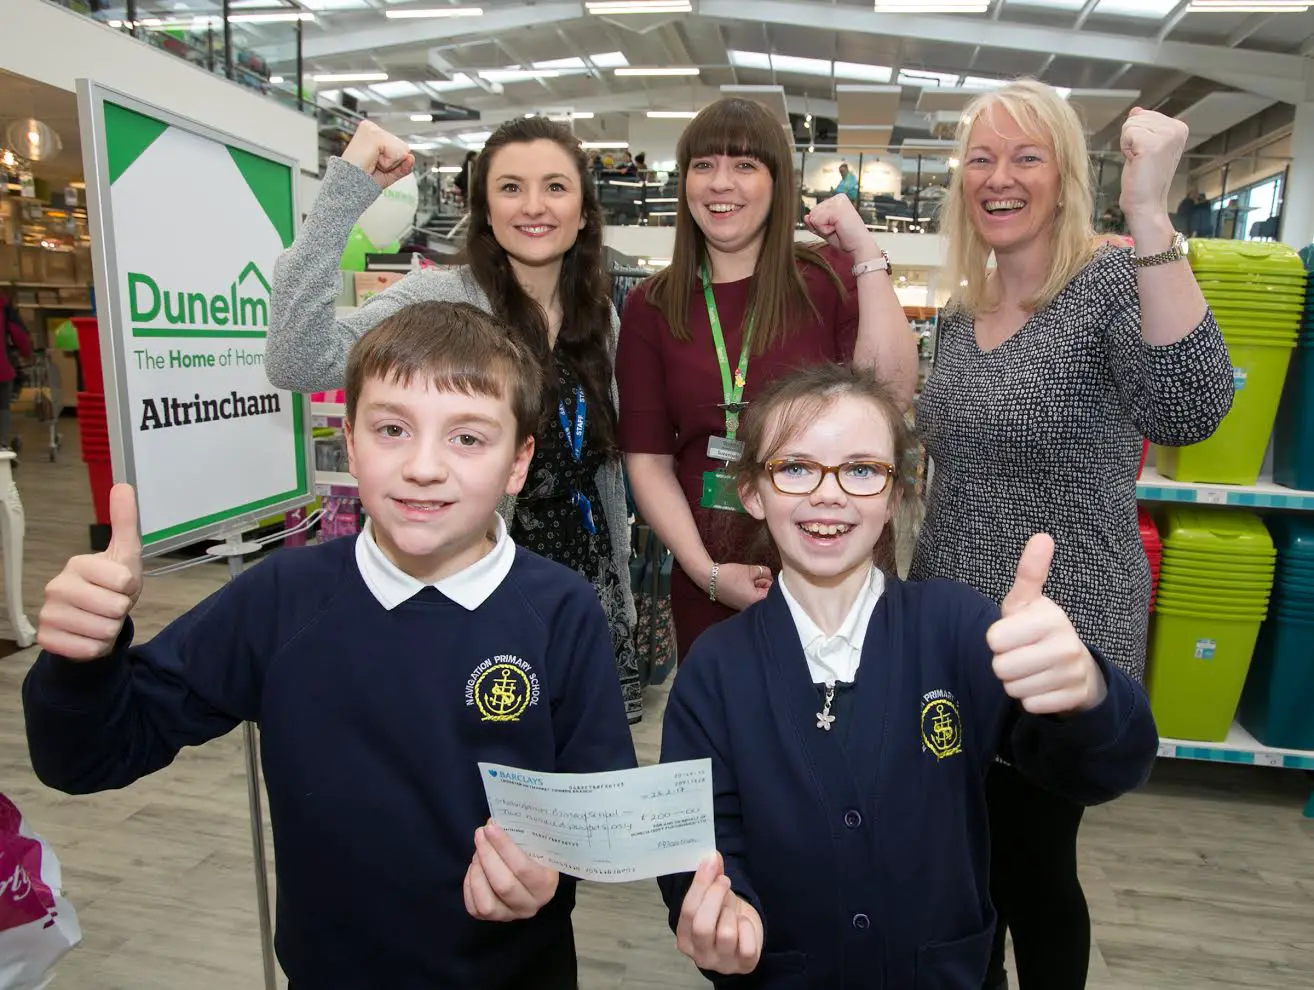 Navigation Primary School pupils are presented with a cheque for £200 by Dunelm earlier today